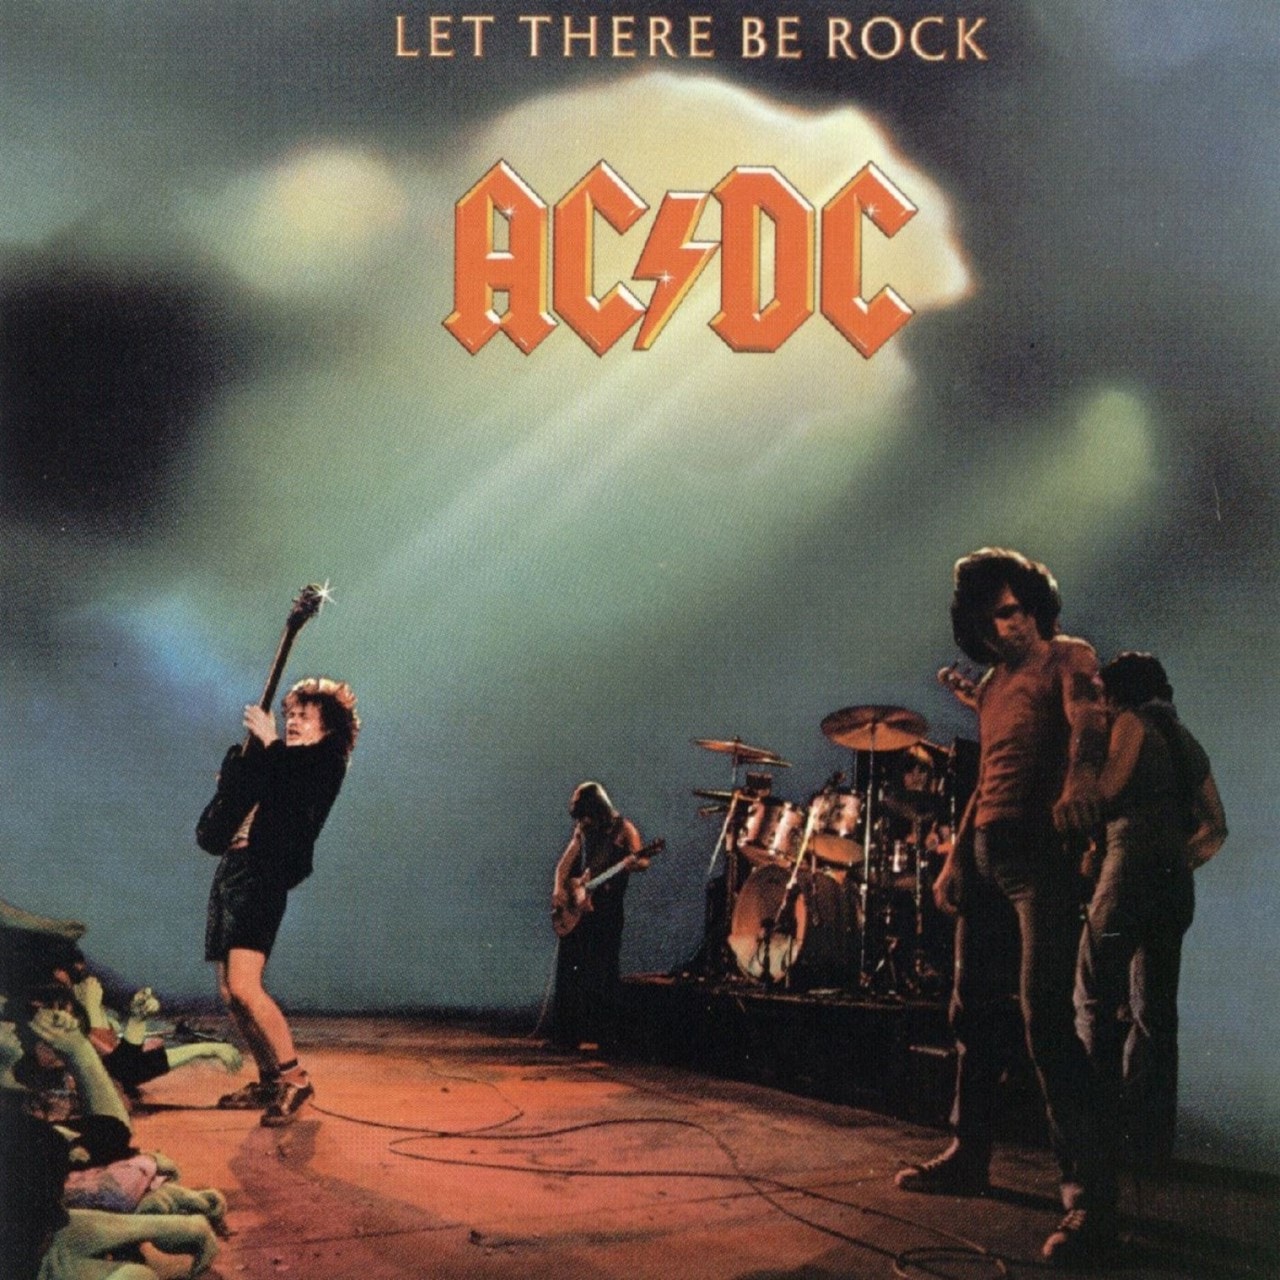 Let There Be Rock | CD Album | Free shipping over £20 | HMV Store